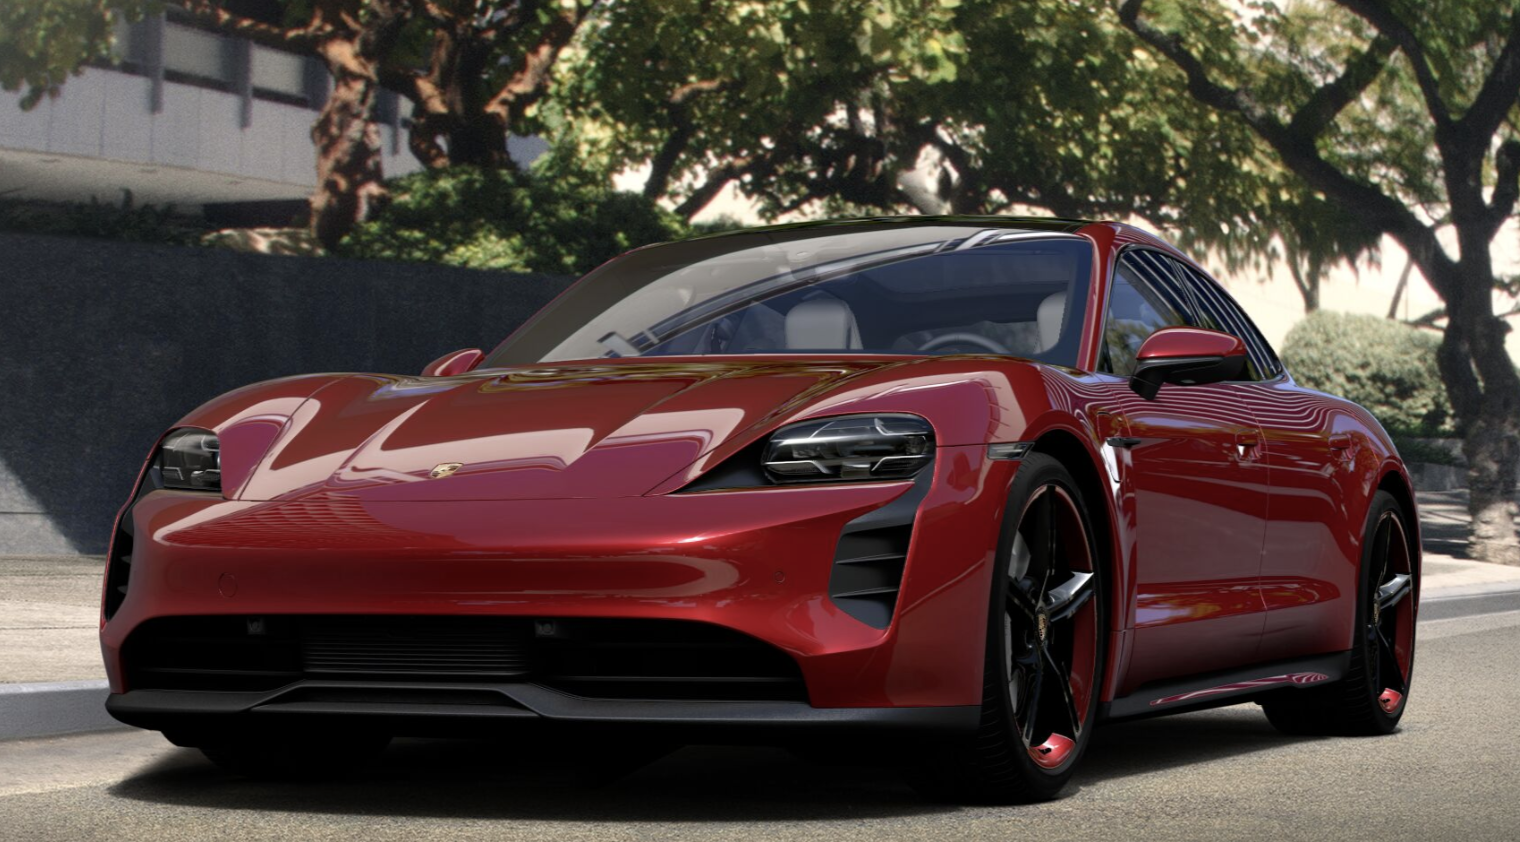 Porsche Taycan 2020 Taycan 4S Build & Price Configurator Online. What's Your Build? Screenshot 2019-10-16 at 20.05.39